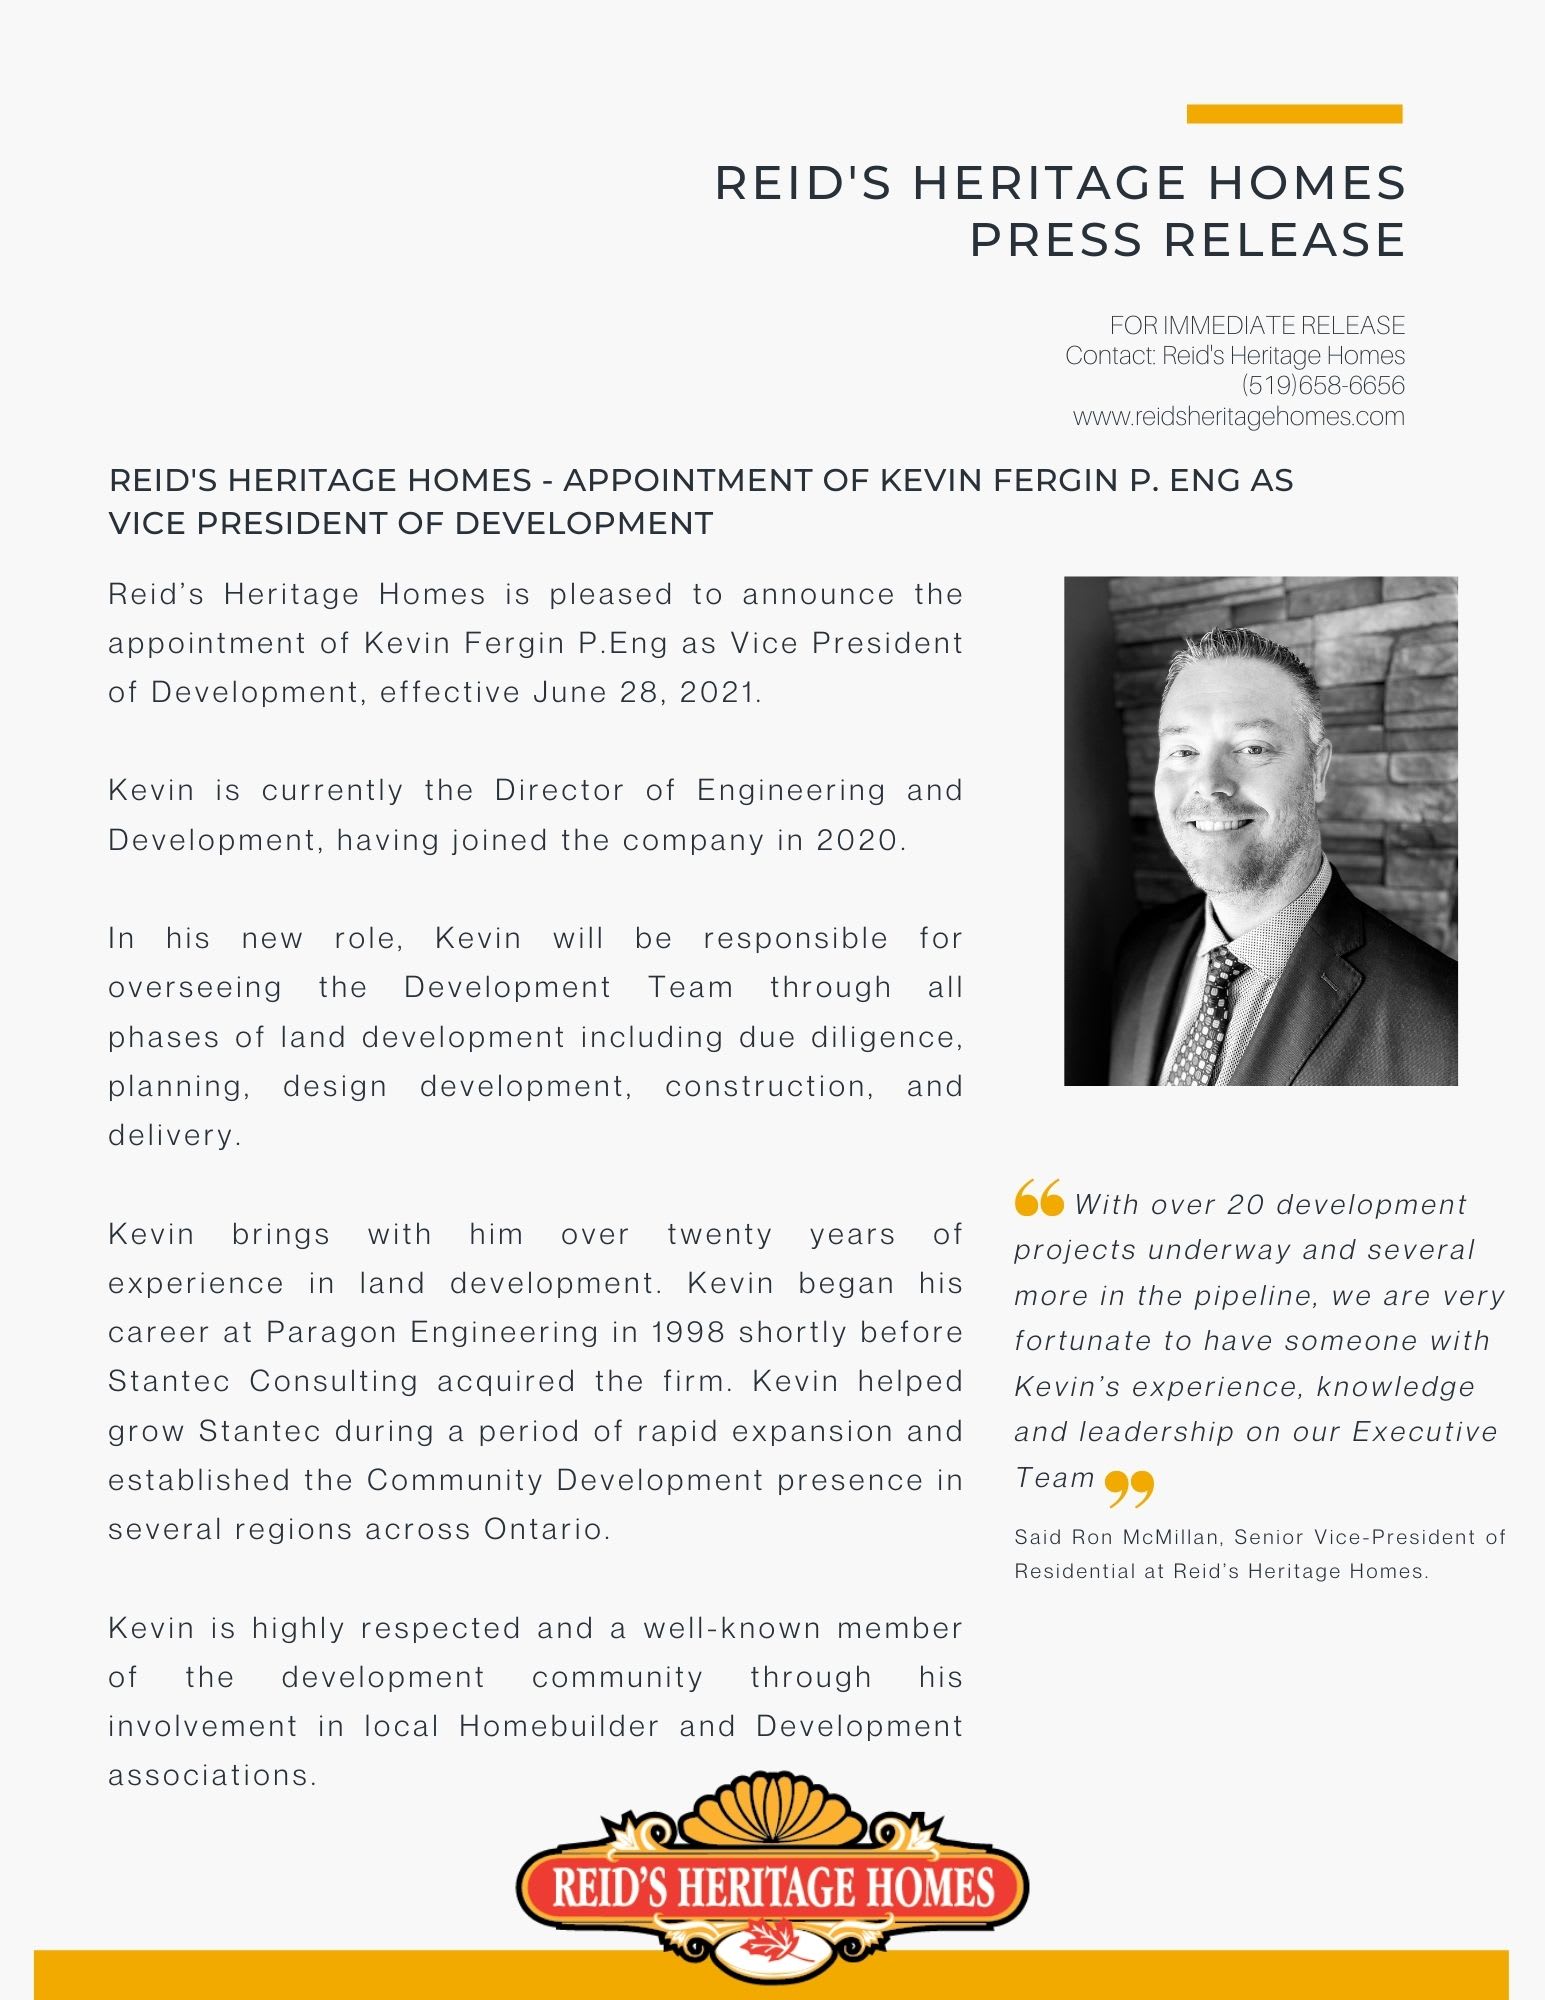 Press Release - Kevin Fergin appointment vice president of development